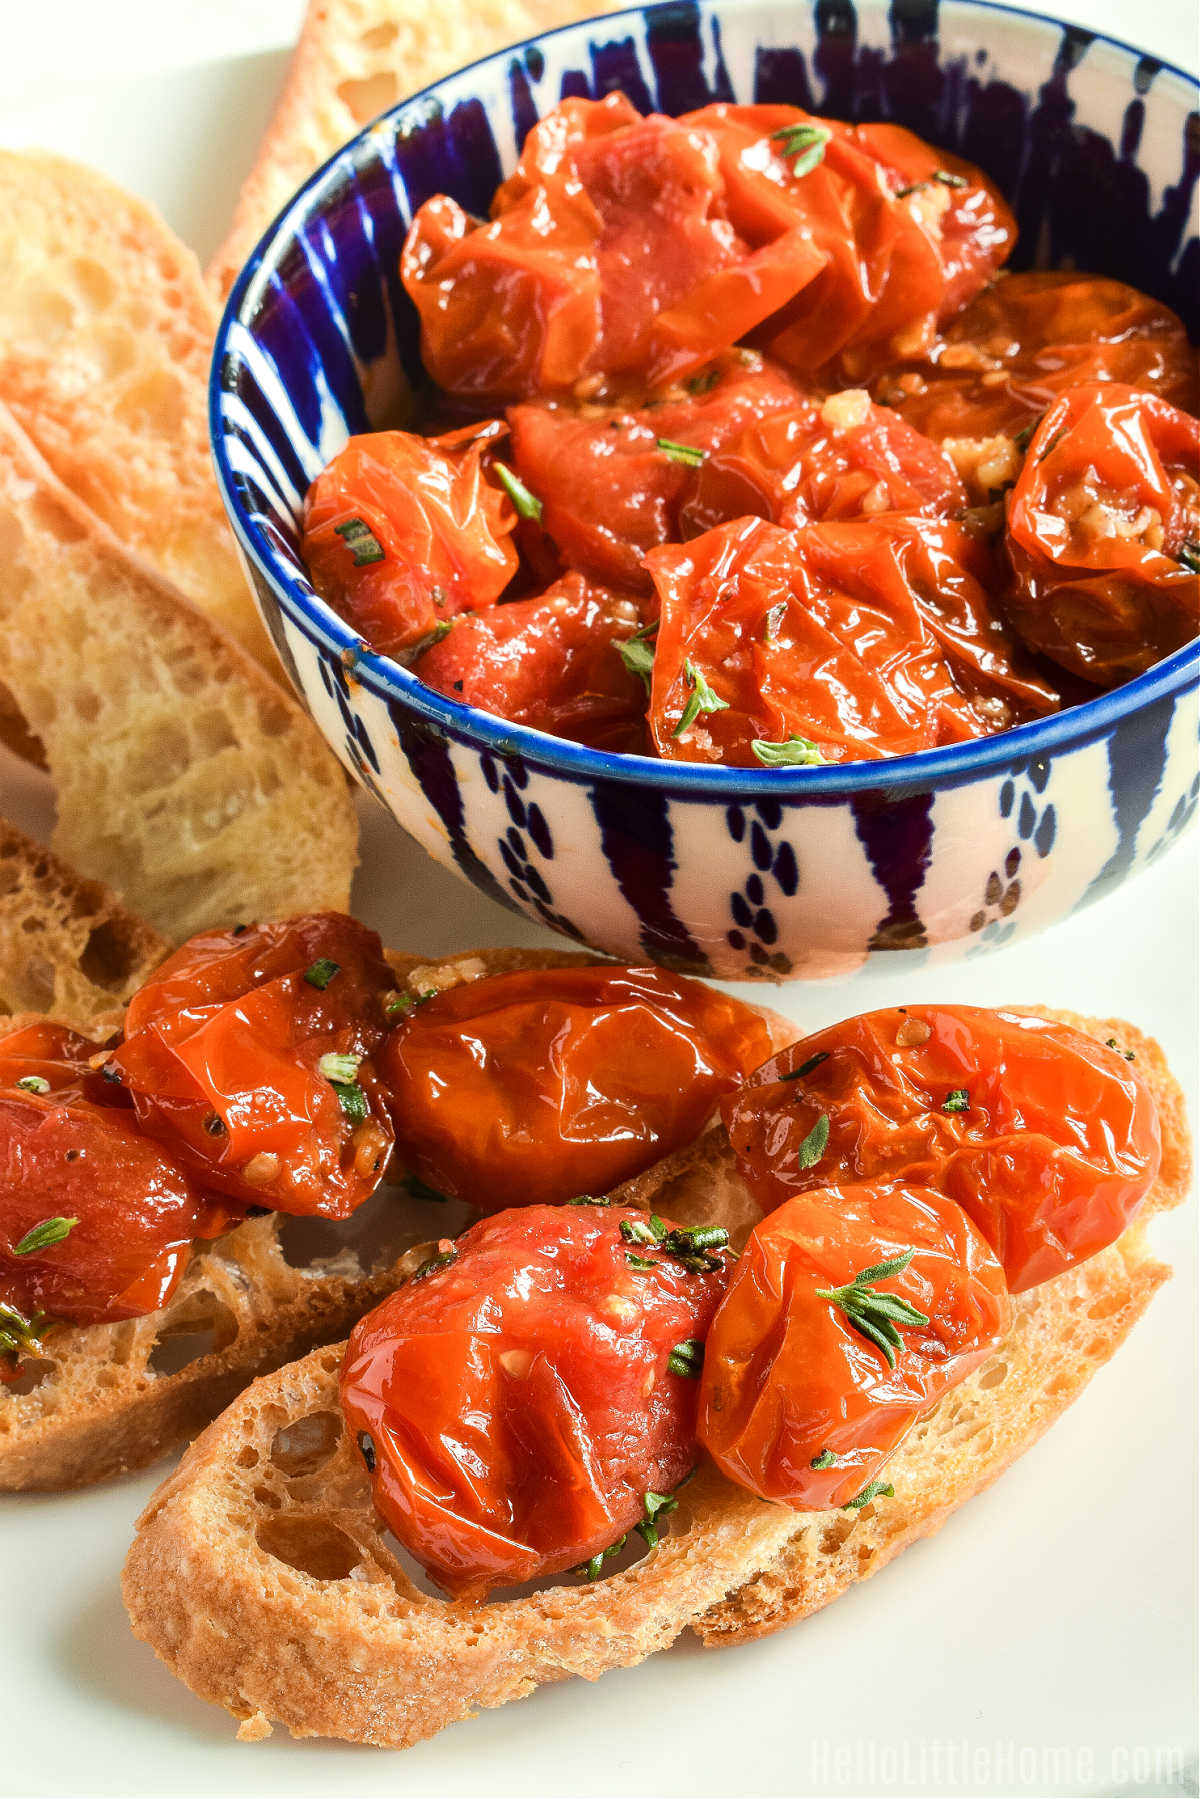 Two toasts topped with the baked tomatoes with a bowl of finished recipe behind them.